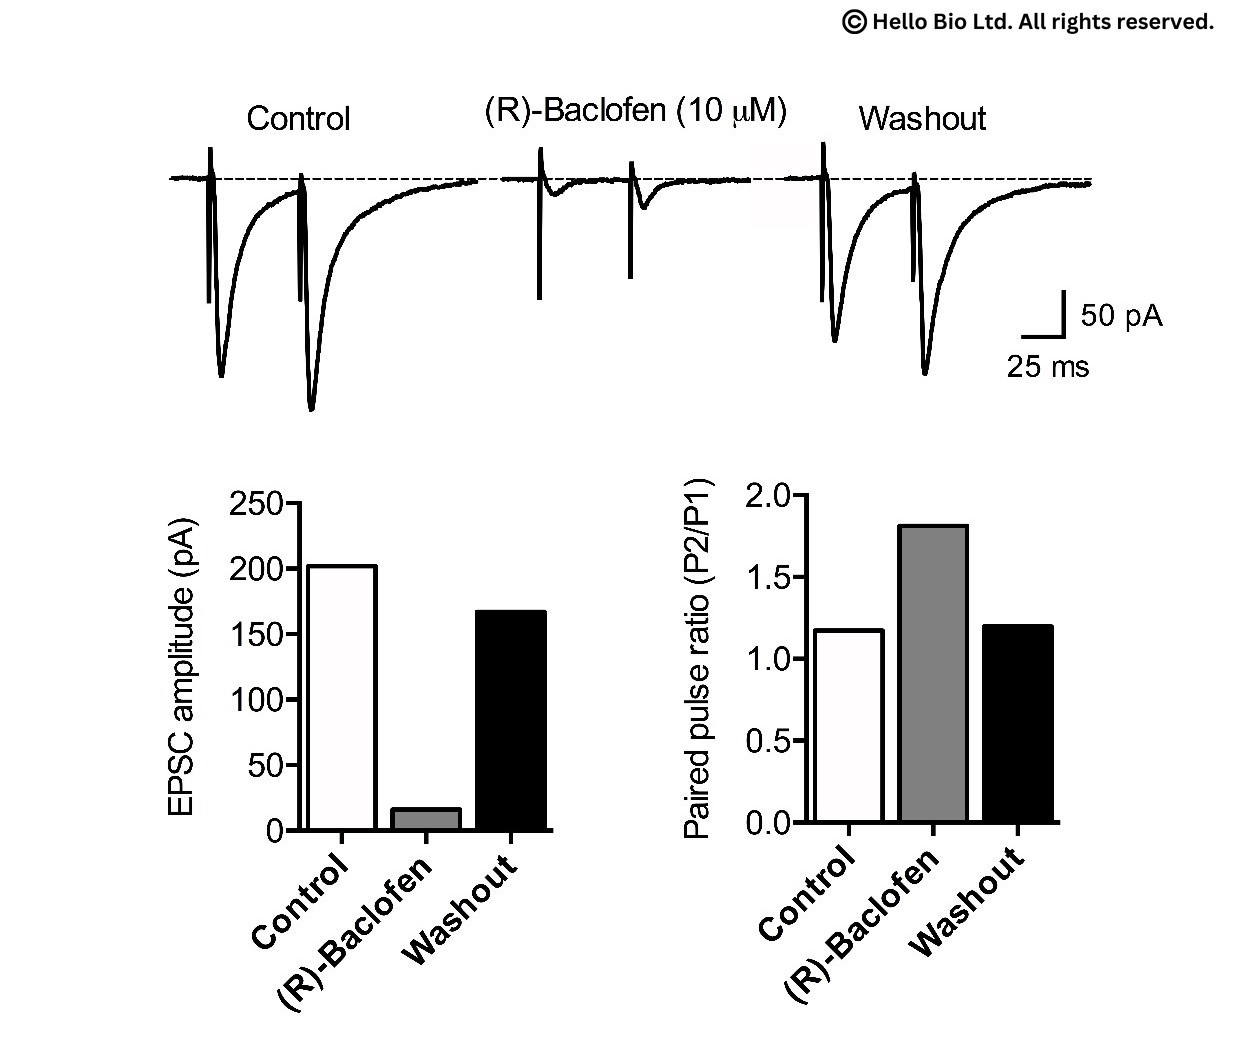 Figure 1. Reversible inhibition of EPSC amplitude and increased EPSC paired pulse ratio in rat CA1 pyramidal neuron in response to (R)-Baclofen